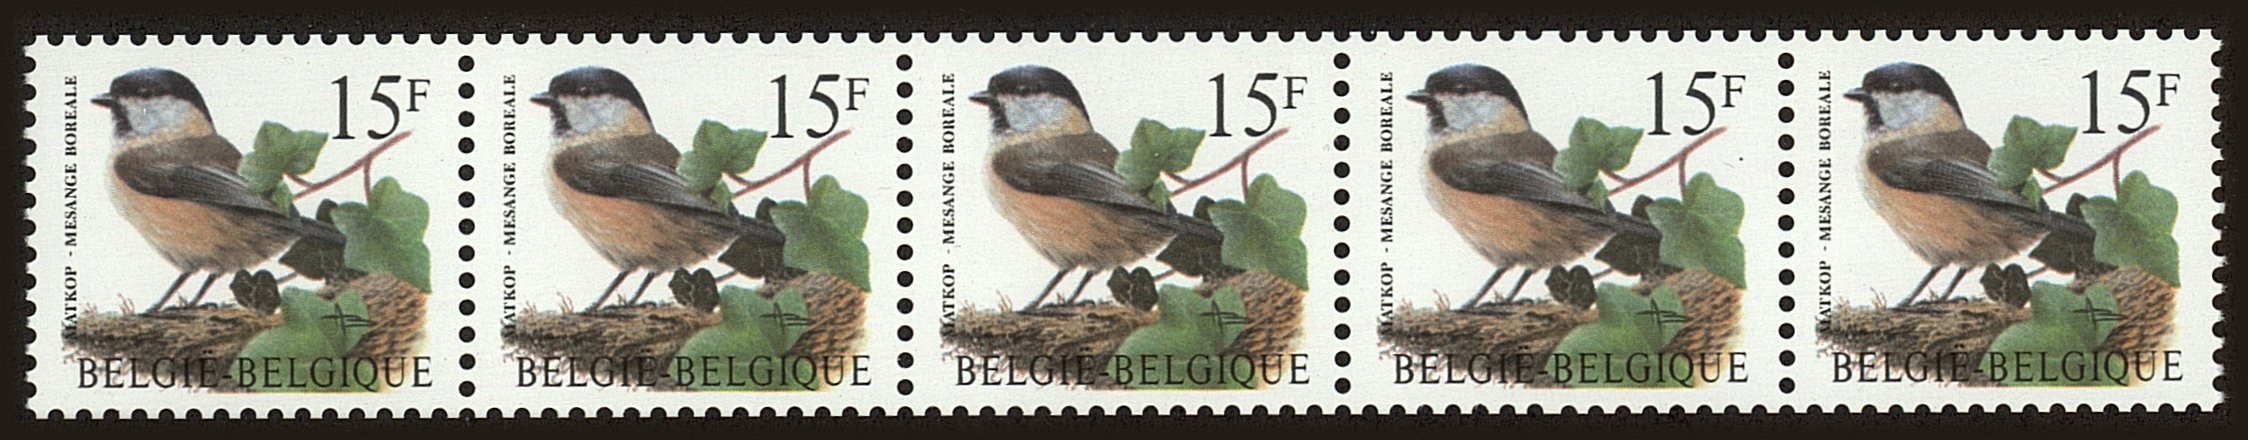 Front view of Belgium 1676a collectors stamp